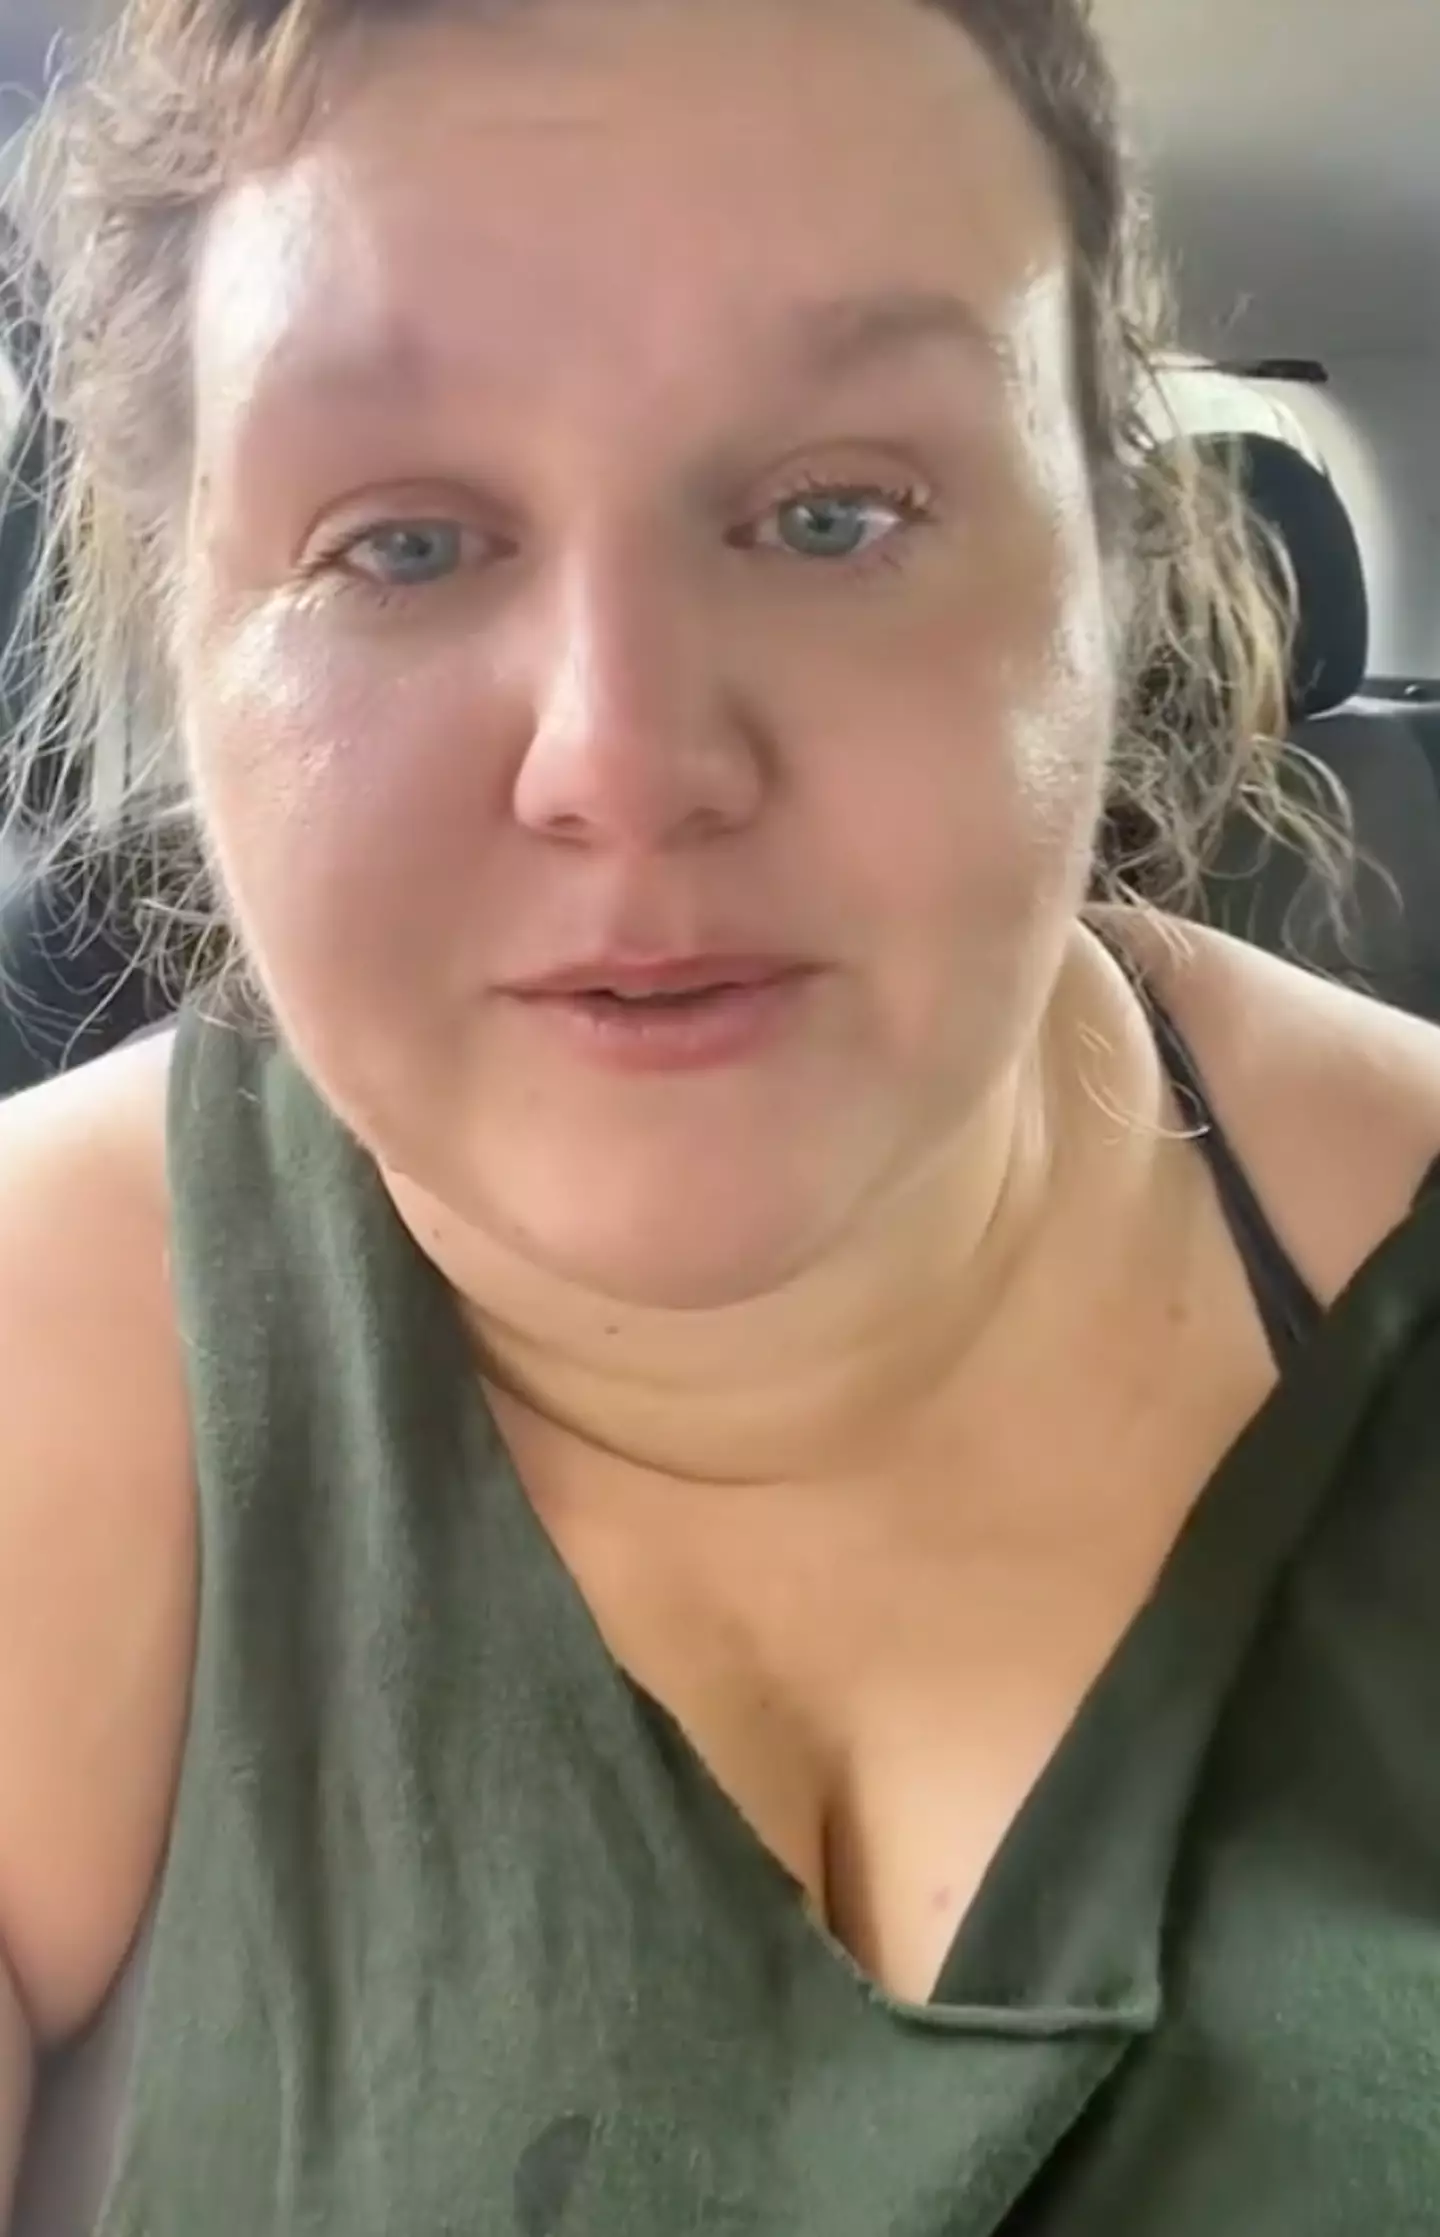 The woman took to TikTok to recount the story.